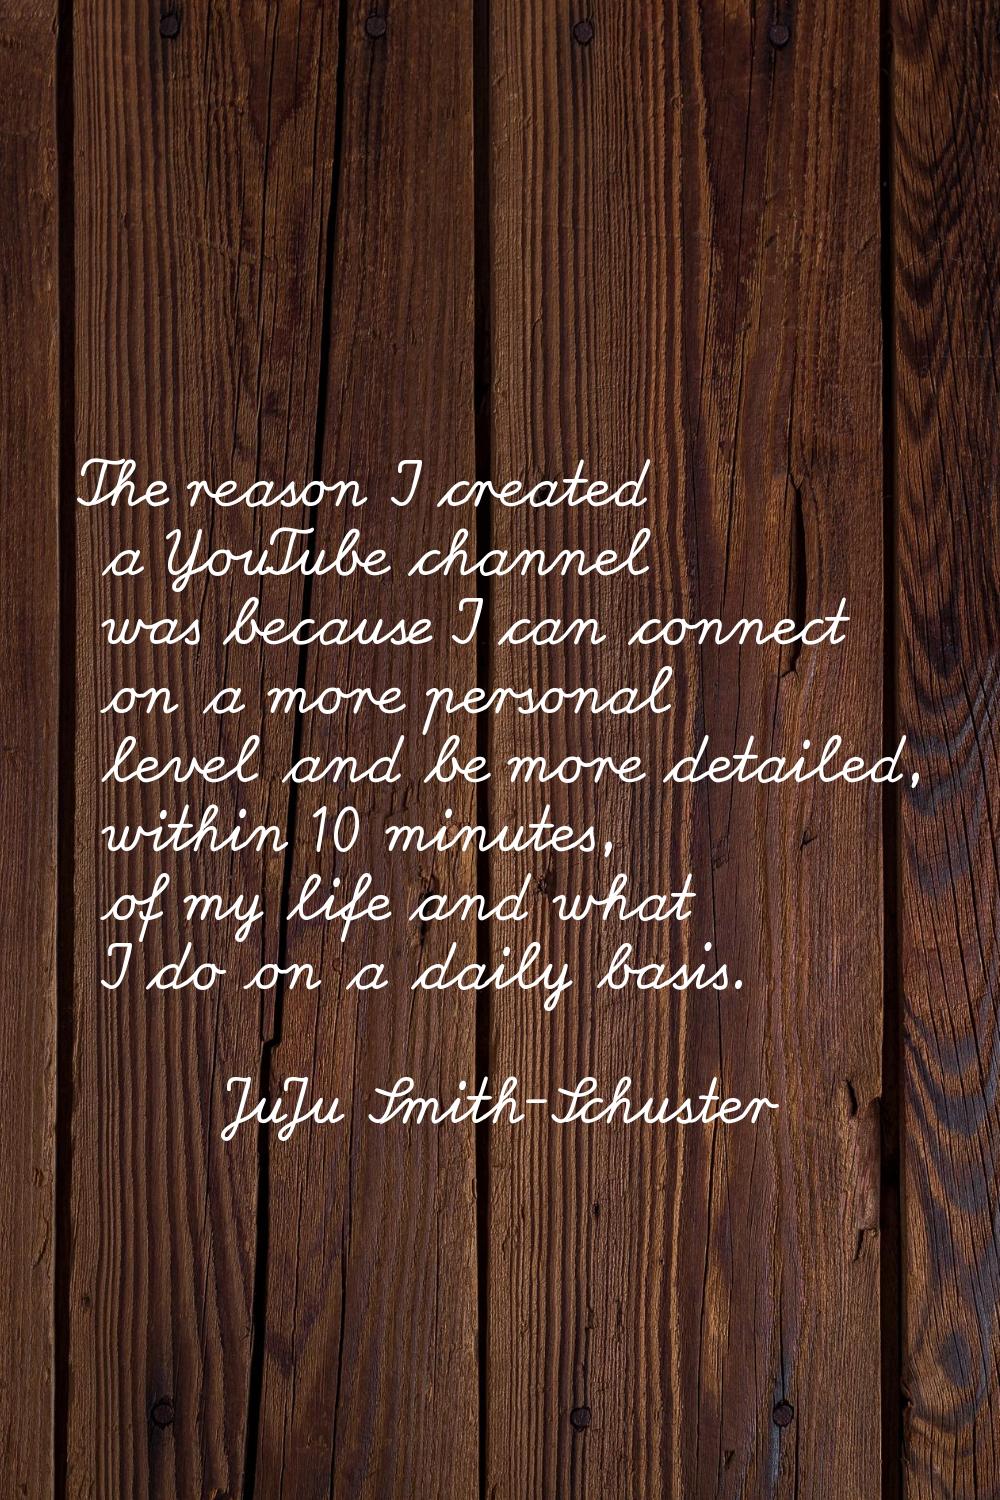 The reason I created a YouTube channel was because I can connect on a more personal level and be mo